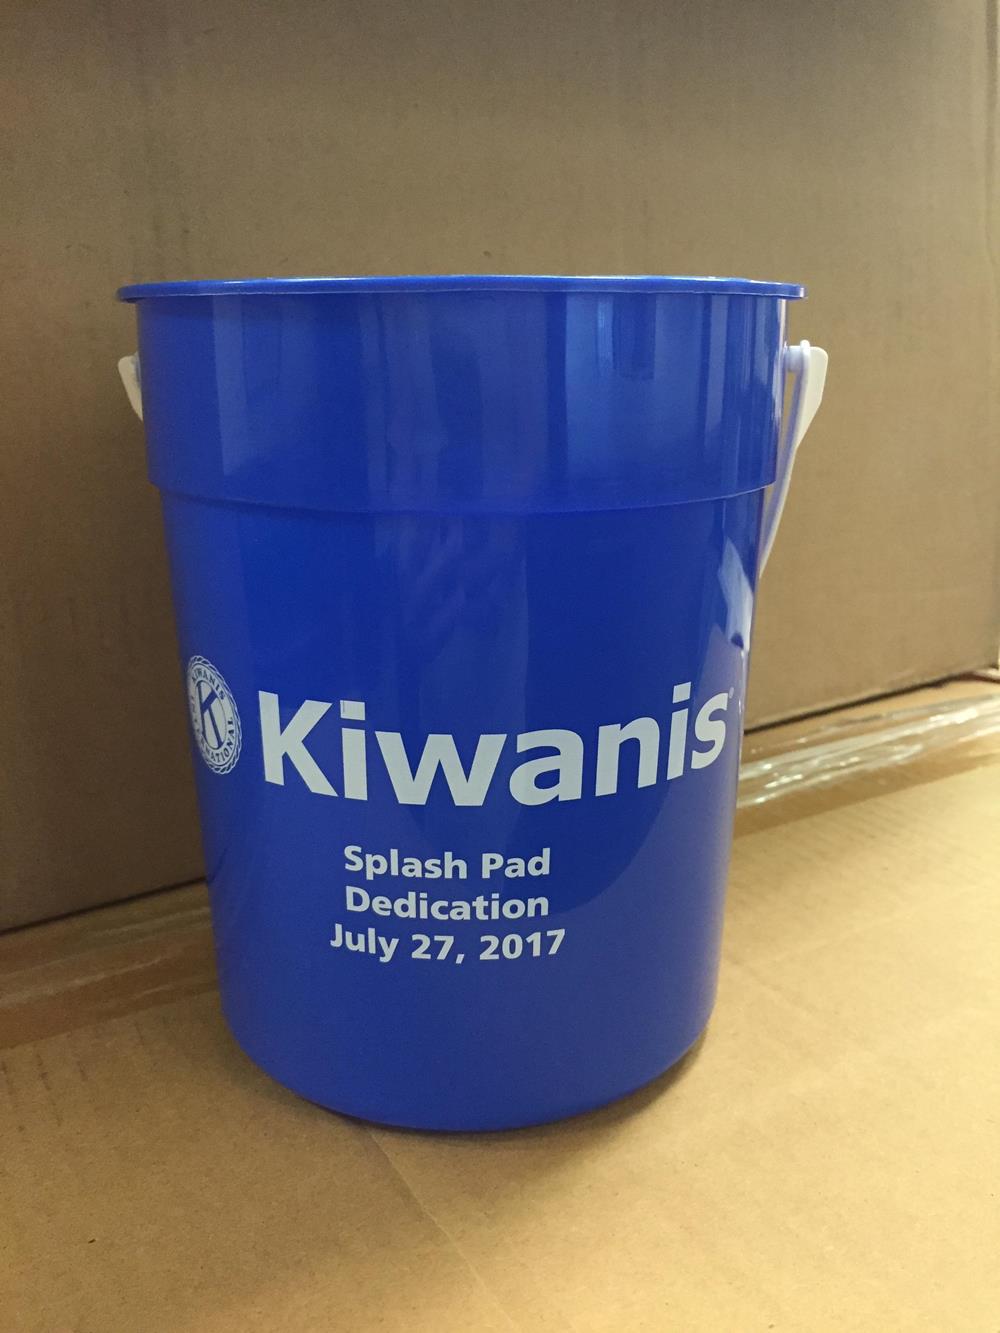 a blue bucket with white text on it